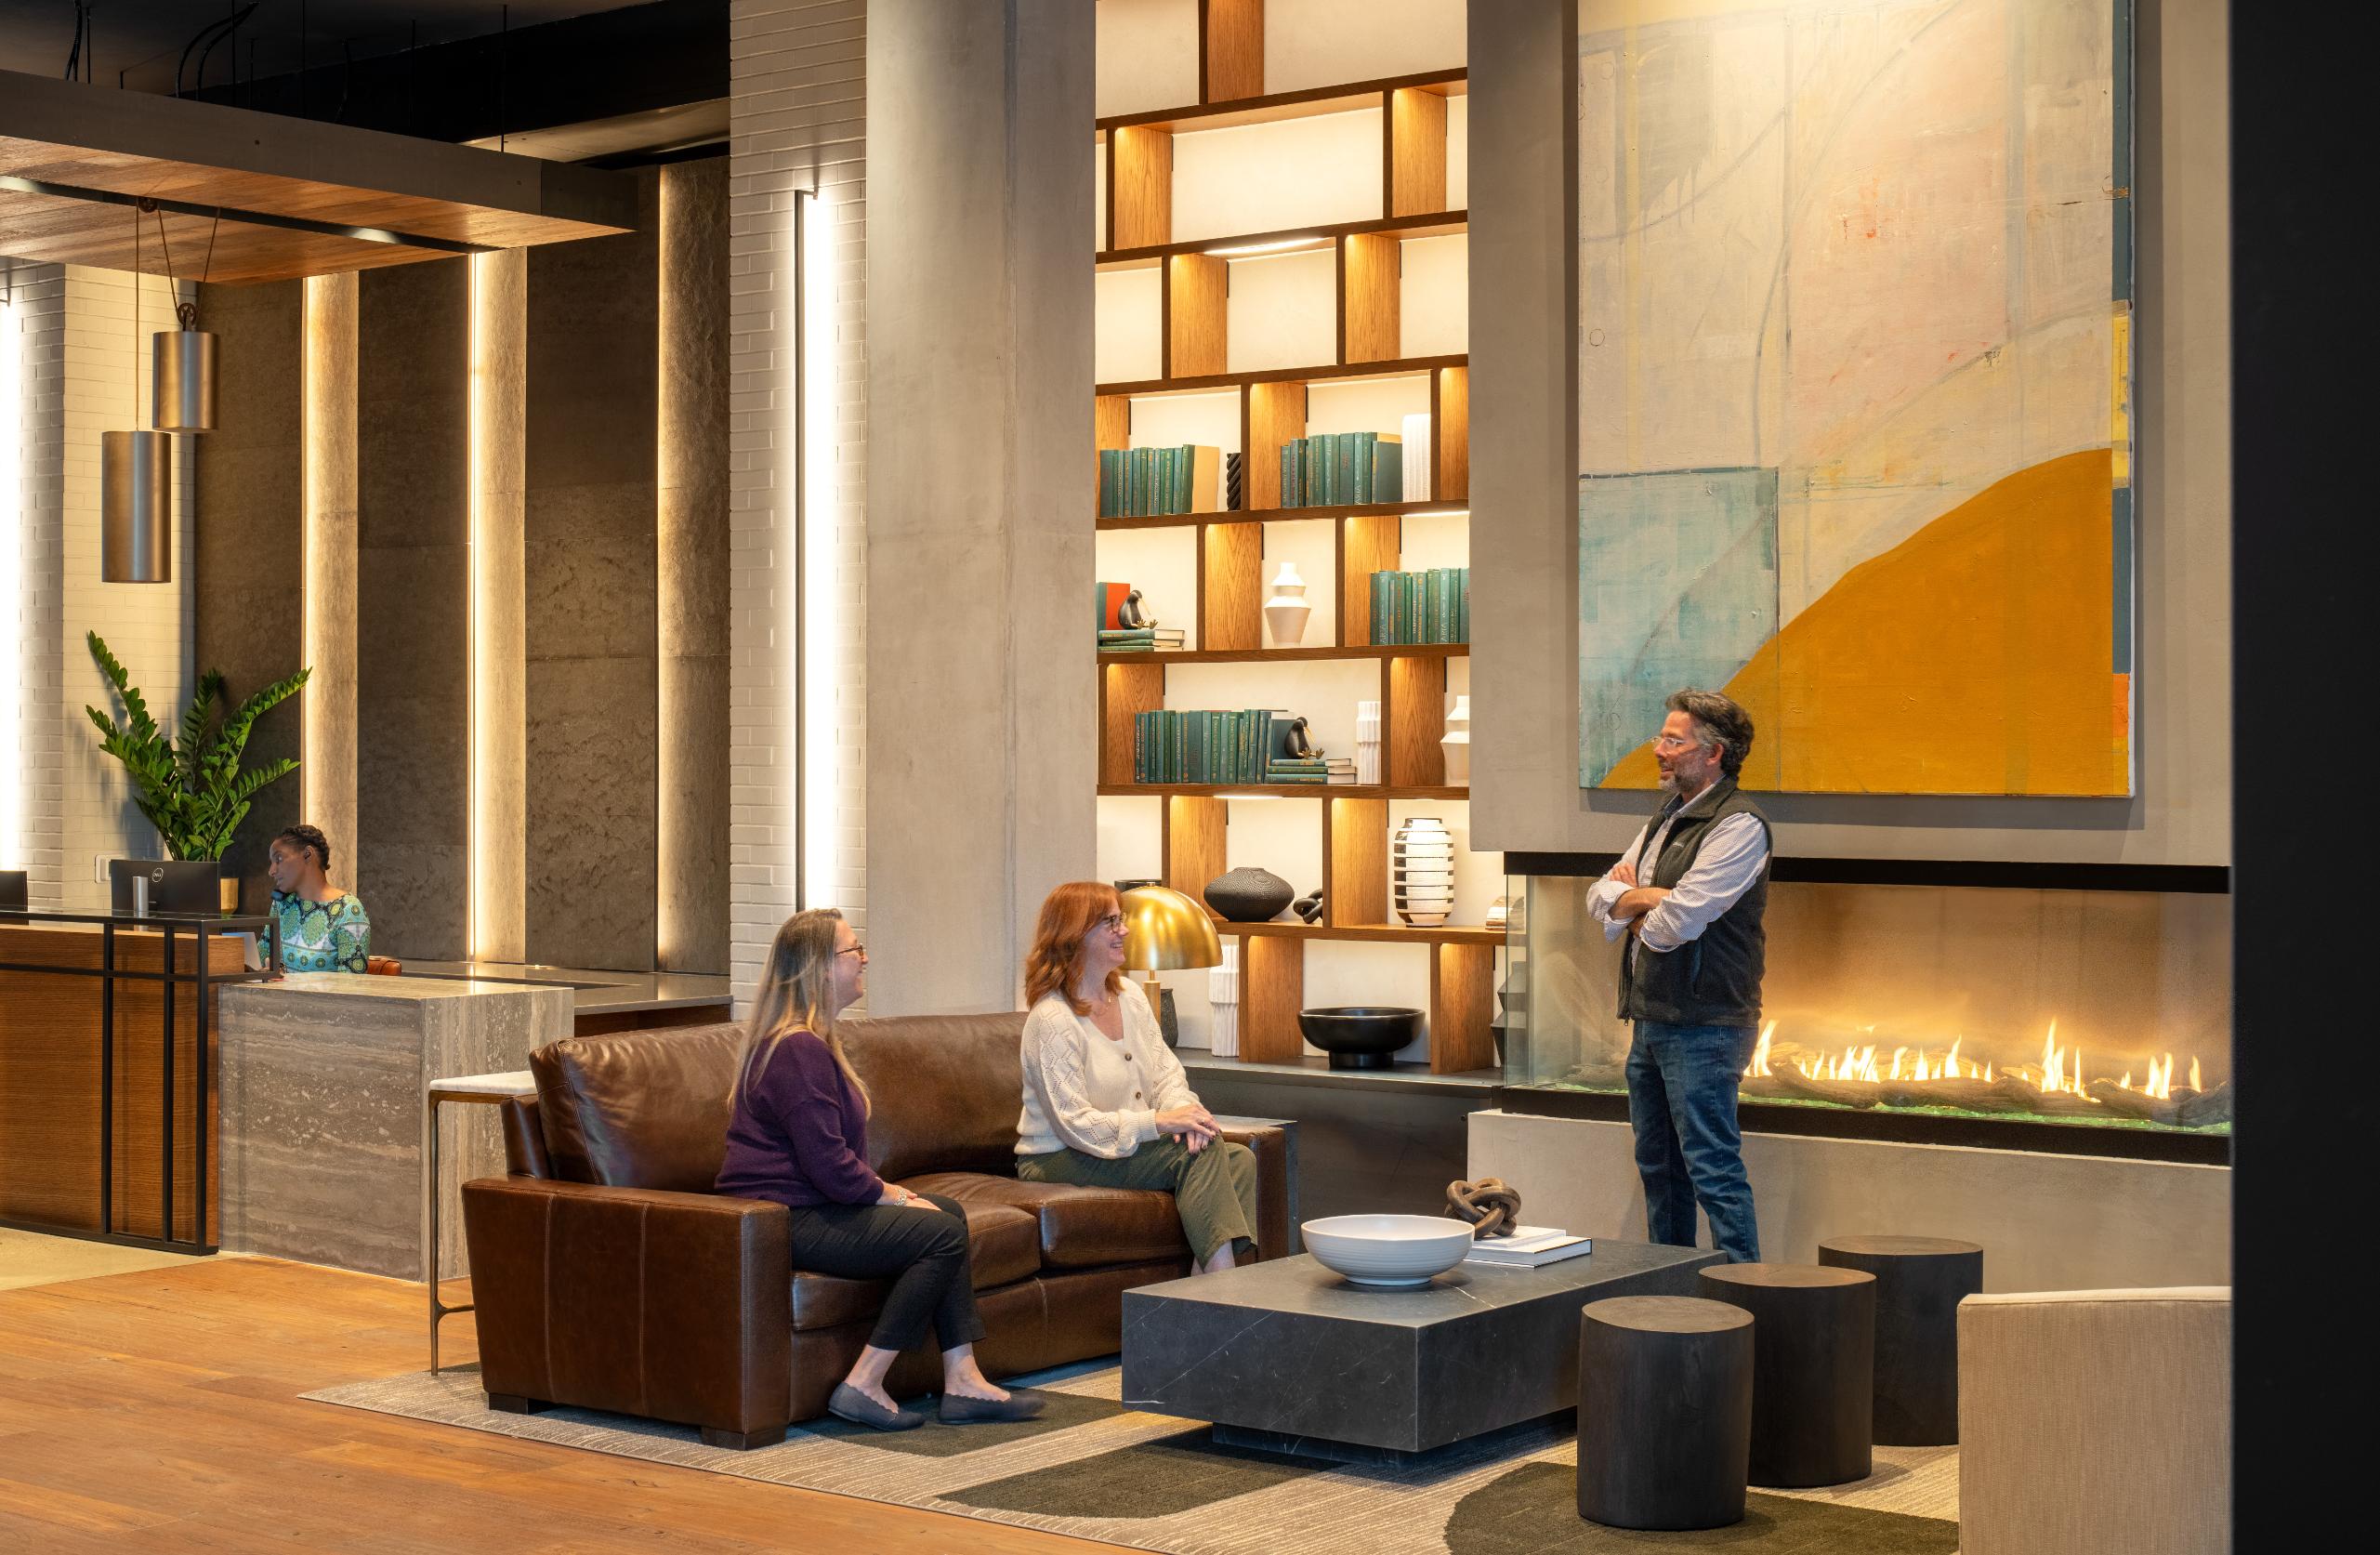 Lobby with seating, fireplace, and people